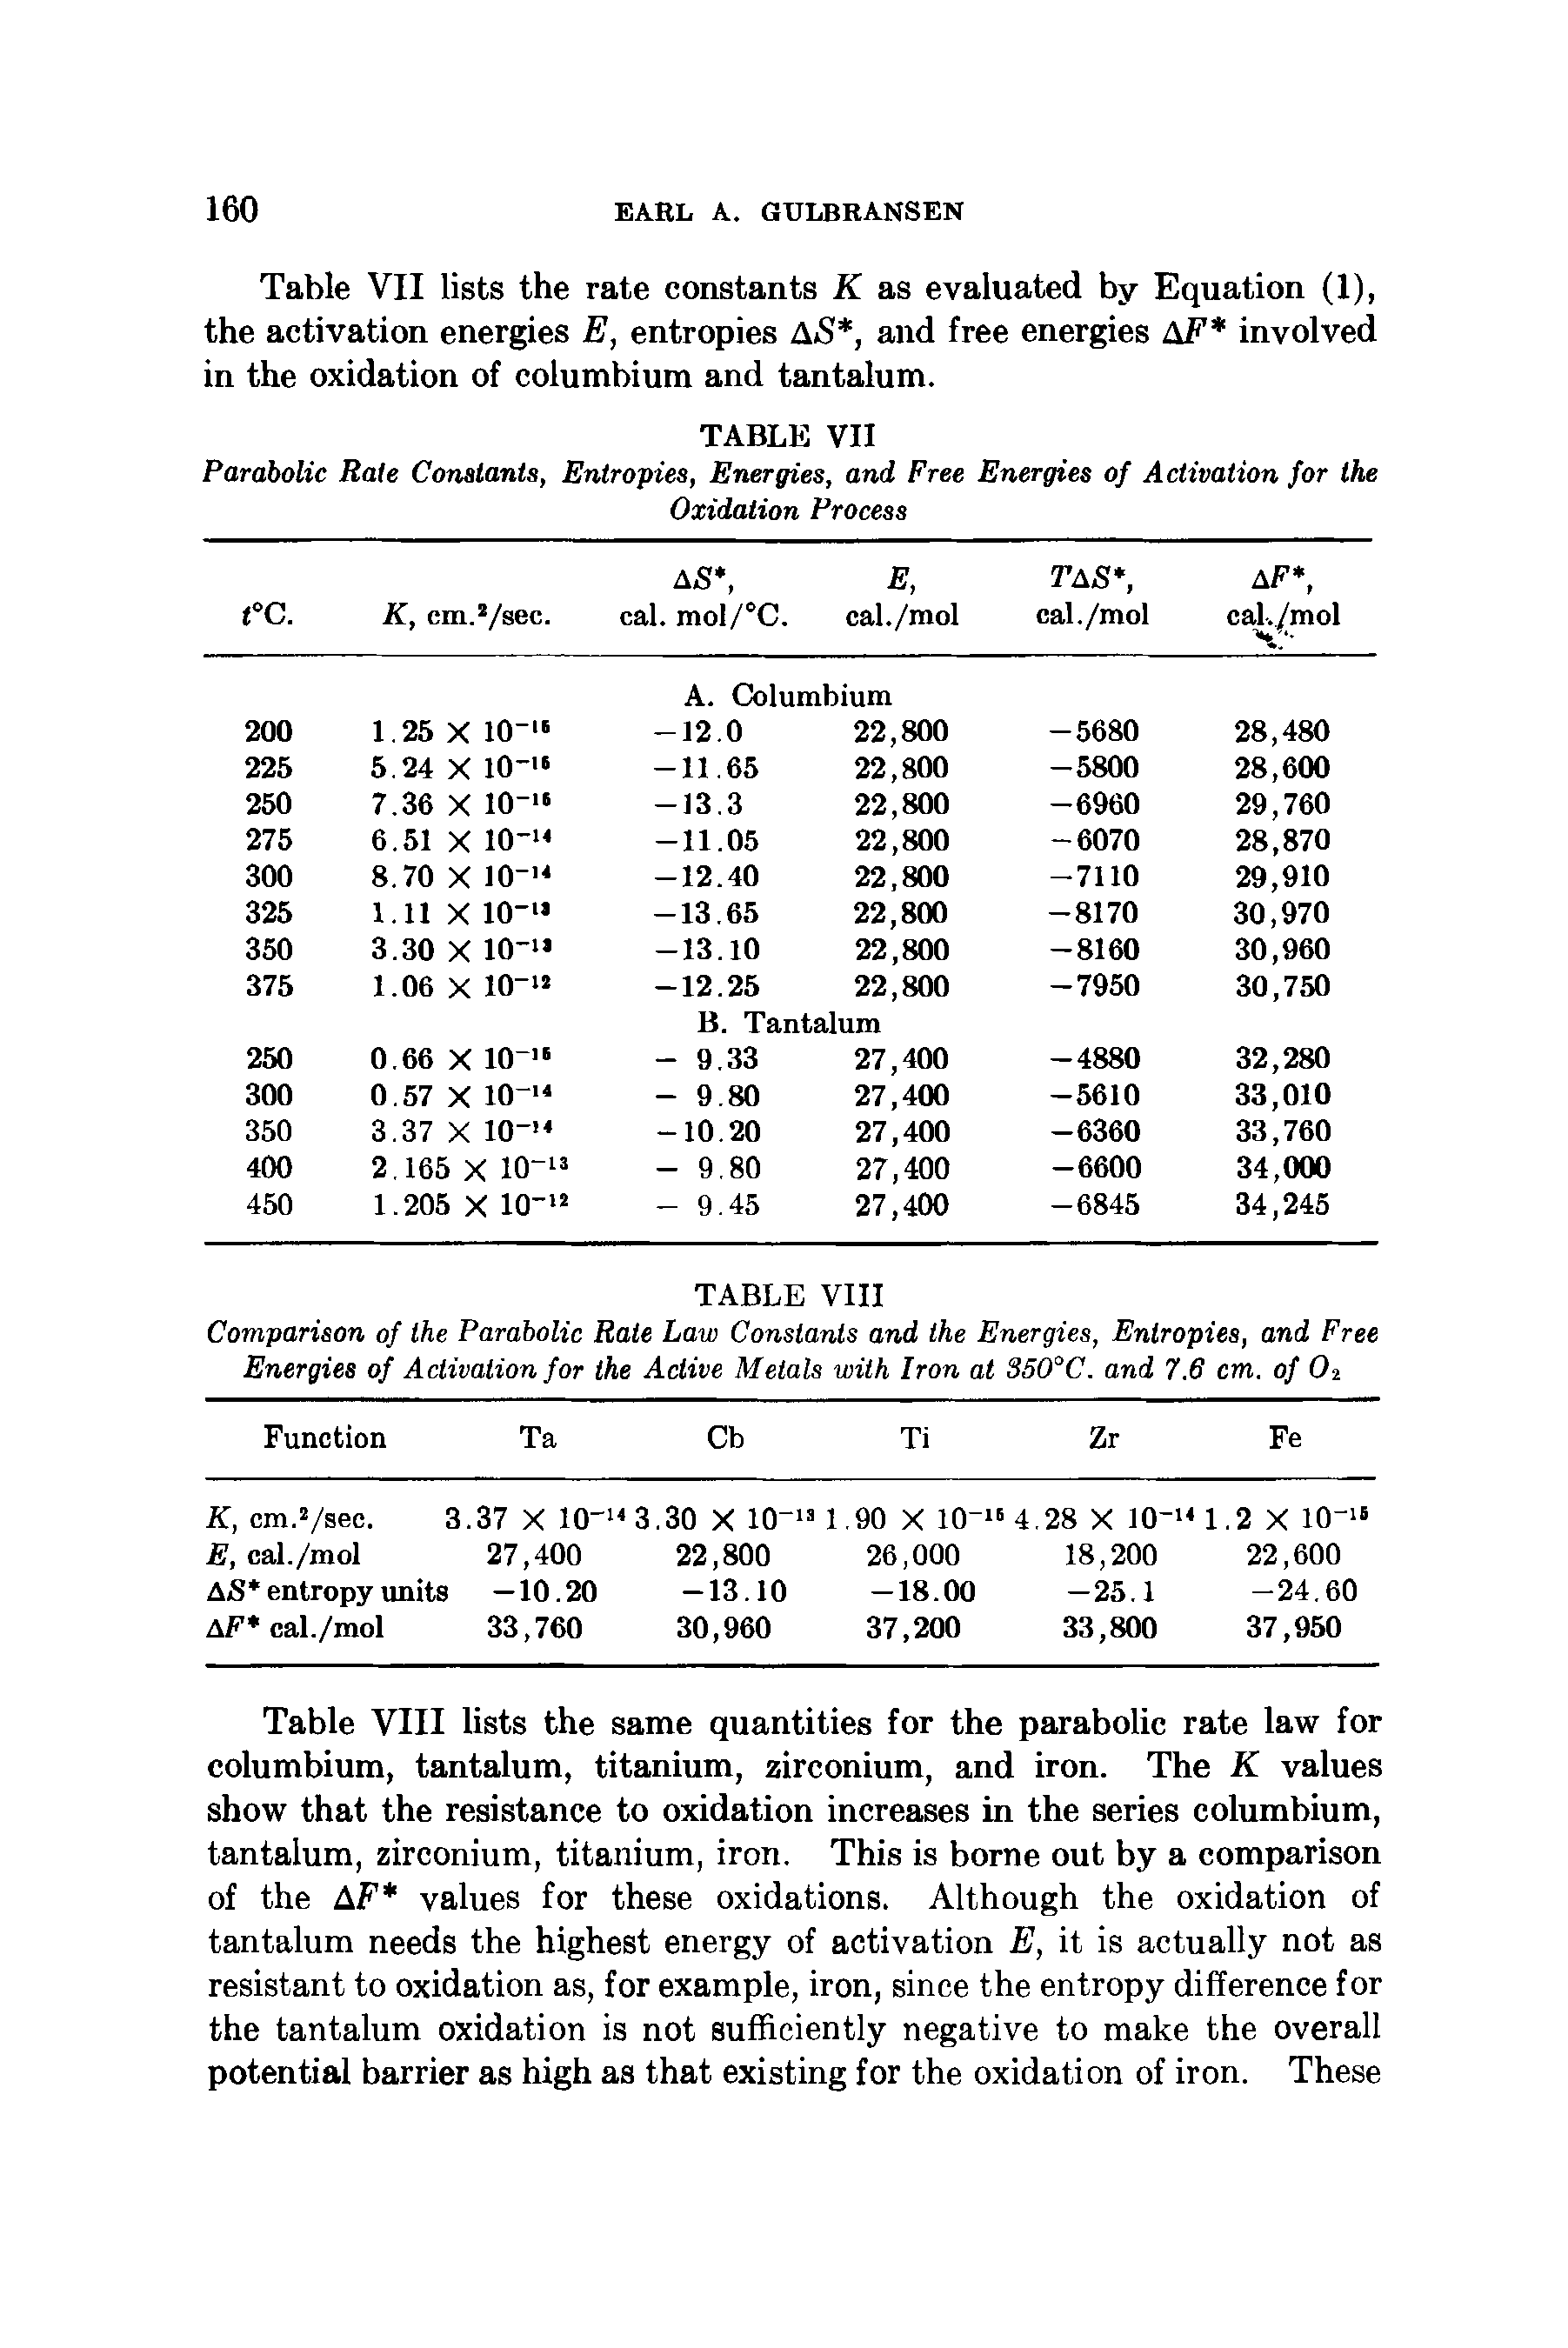 Table VIII lists the same quantities for the parabolic rate law for columbium, tantalum, titanium, zirconium, and iron. The K values show that the resistance to oxidation increases in the series columbium, tantalum, zirconium, titanium, iron. This is borne out by a comparison of the AF values for these oxidations. Although the oxidation of tantalum needs the highest energy of activation E, it is actually not as resistant to oxidation as, for example, iron, since the entropy difference for the tantalum oxidation is not sufficiently negative to make the overall potential barrier as high as that existing for the oxidation of iron. These...